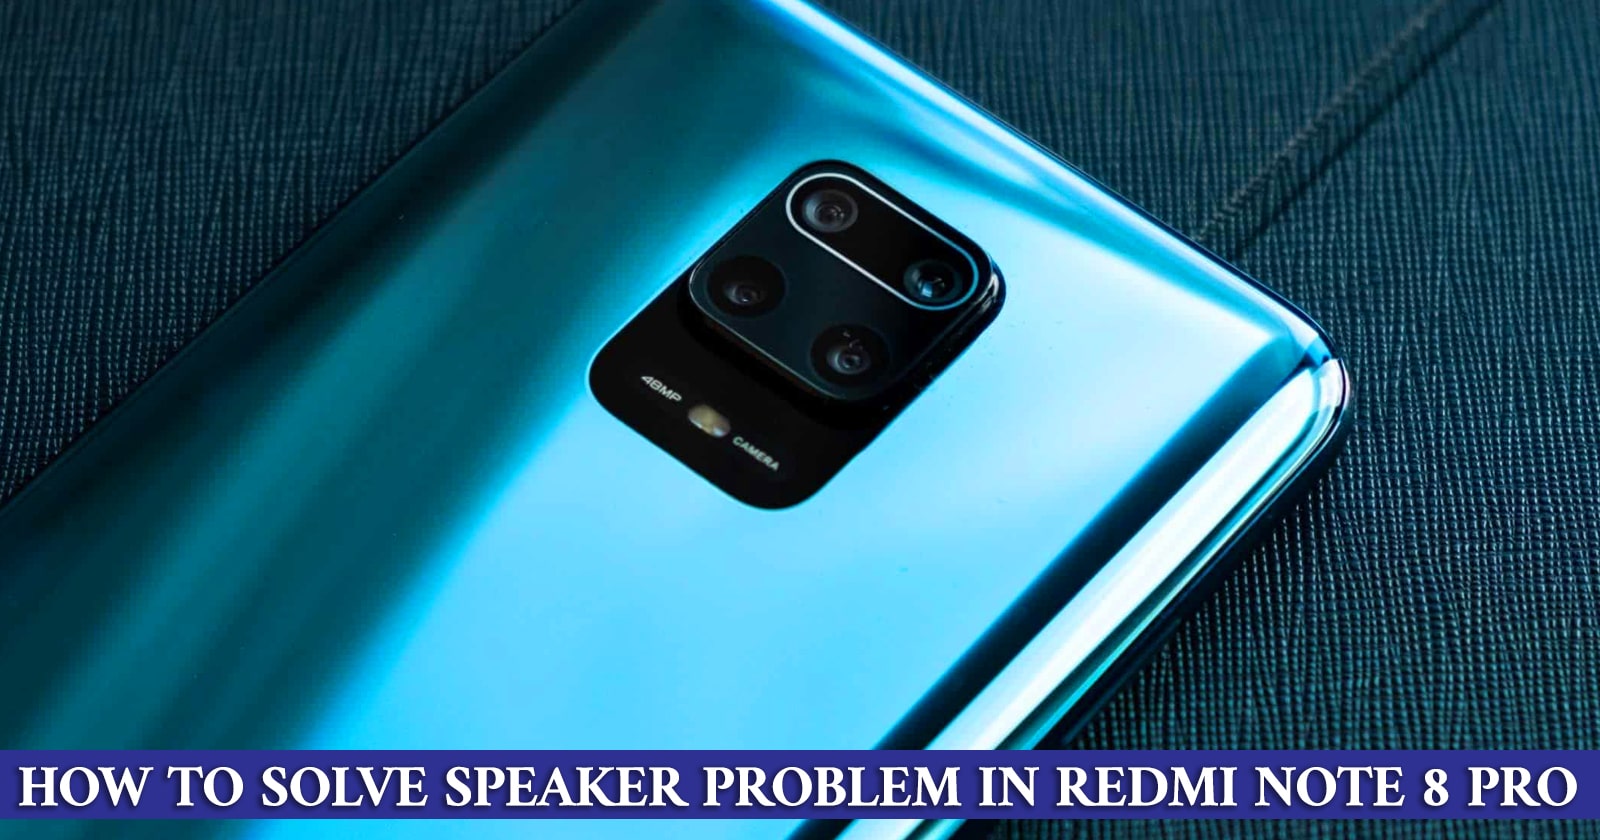 How to Solve Speaker Problem in Redmi Note 8 Pro